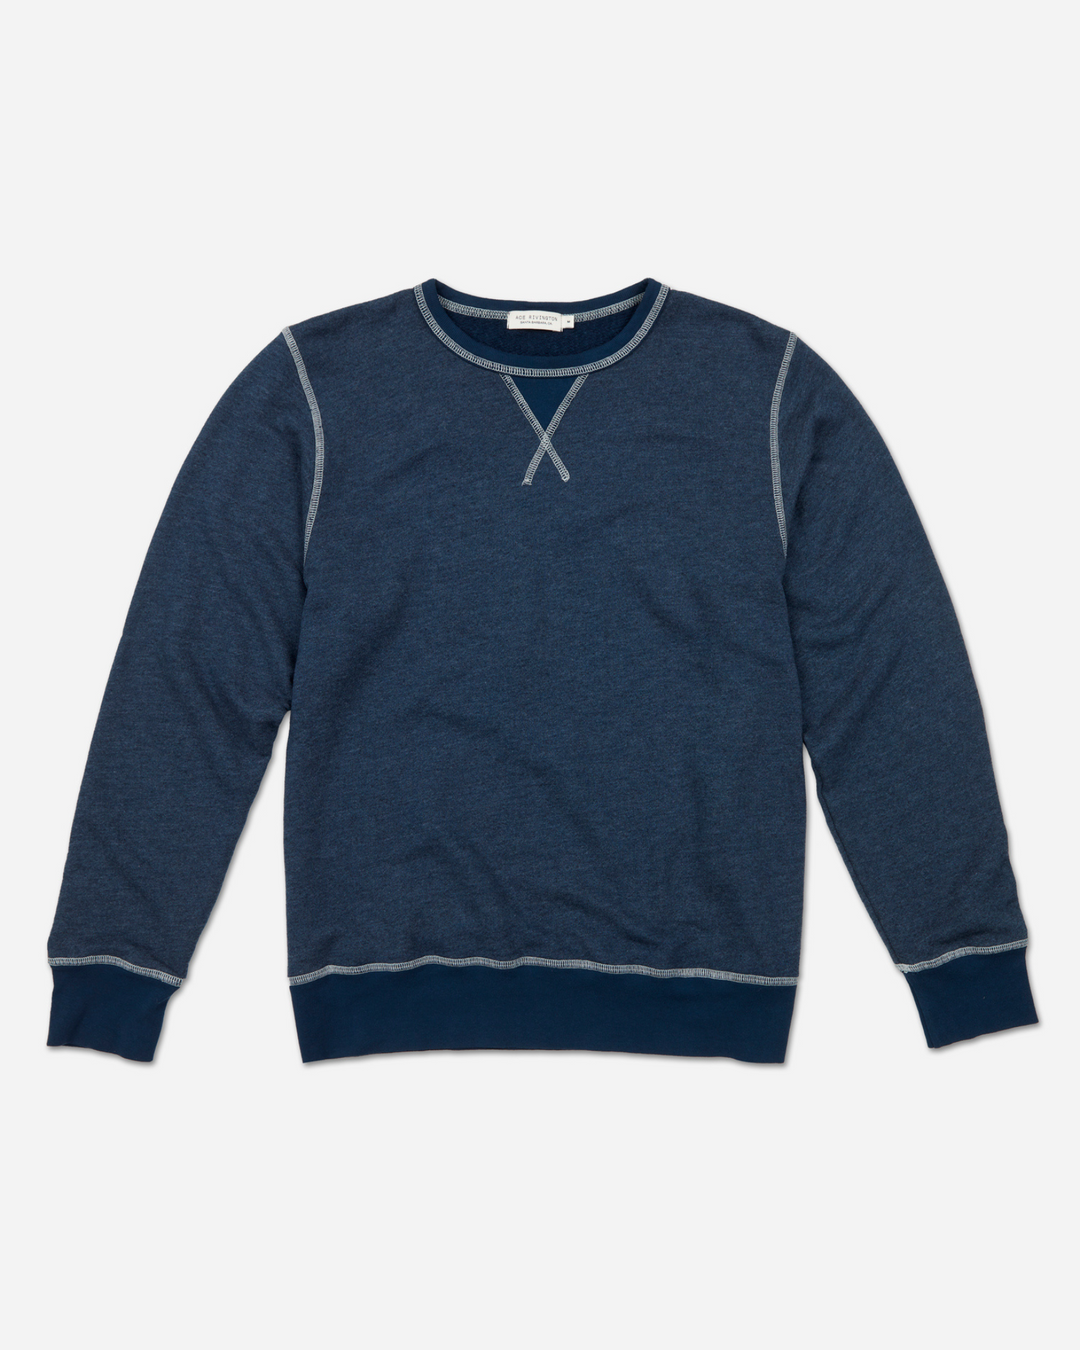 front of fully extended off navy blue homespun french terry crew neck sweatshirt with white accent stitching